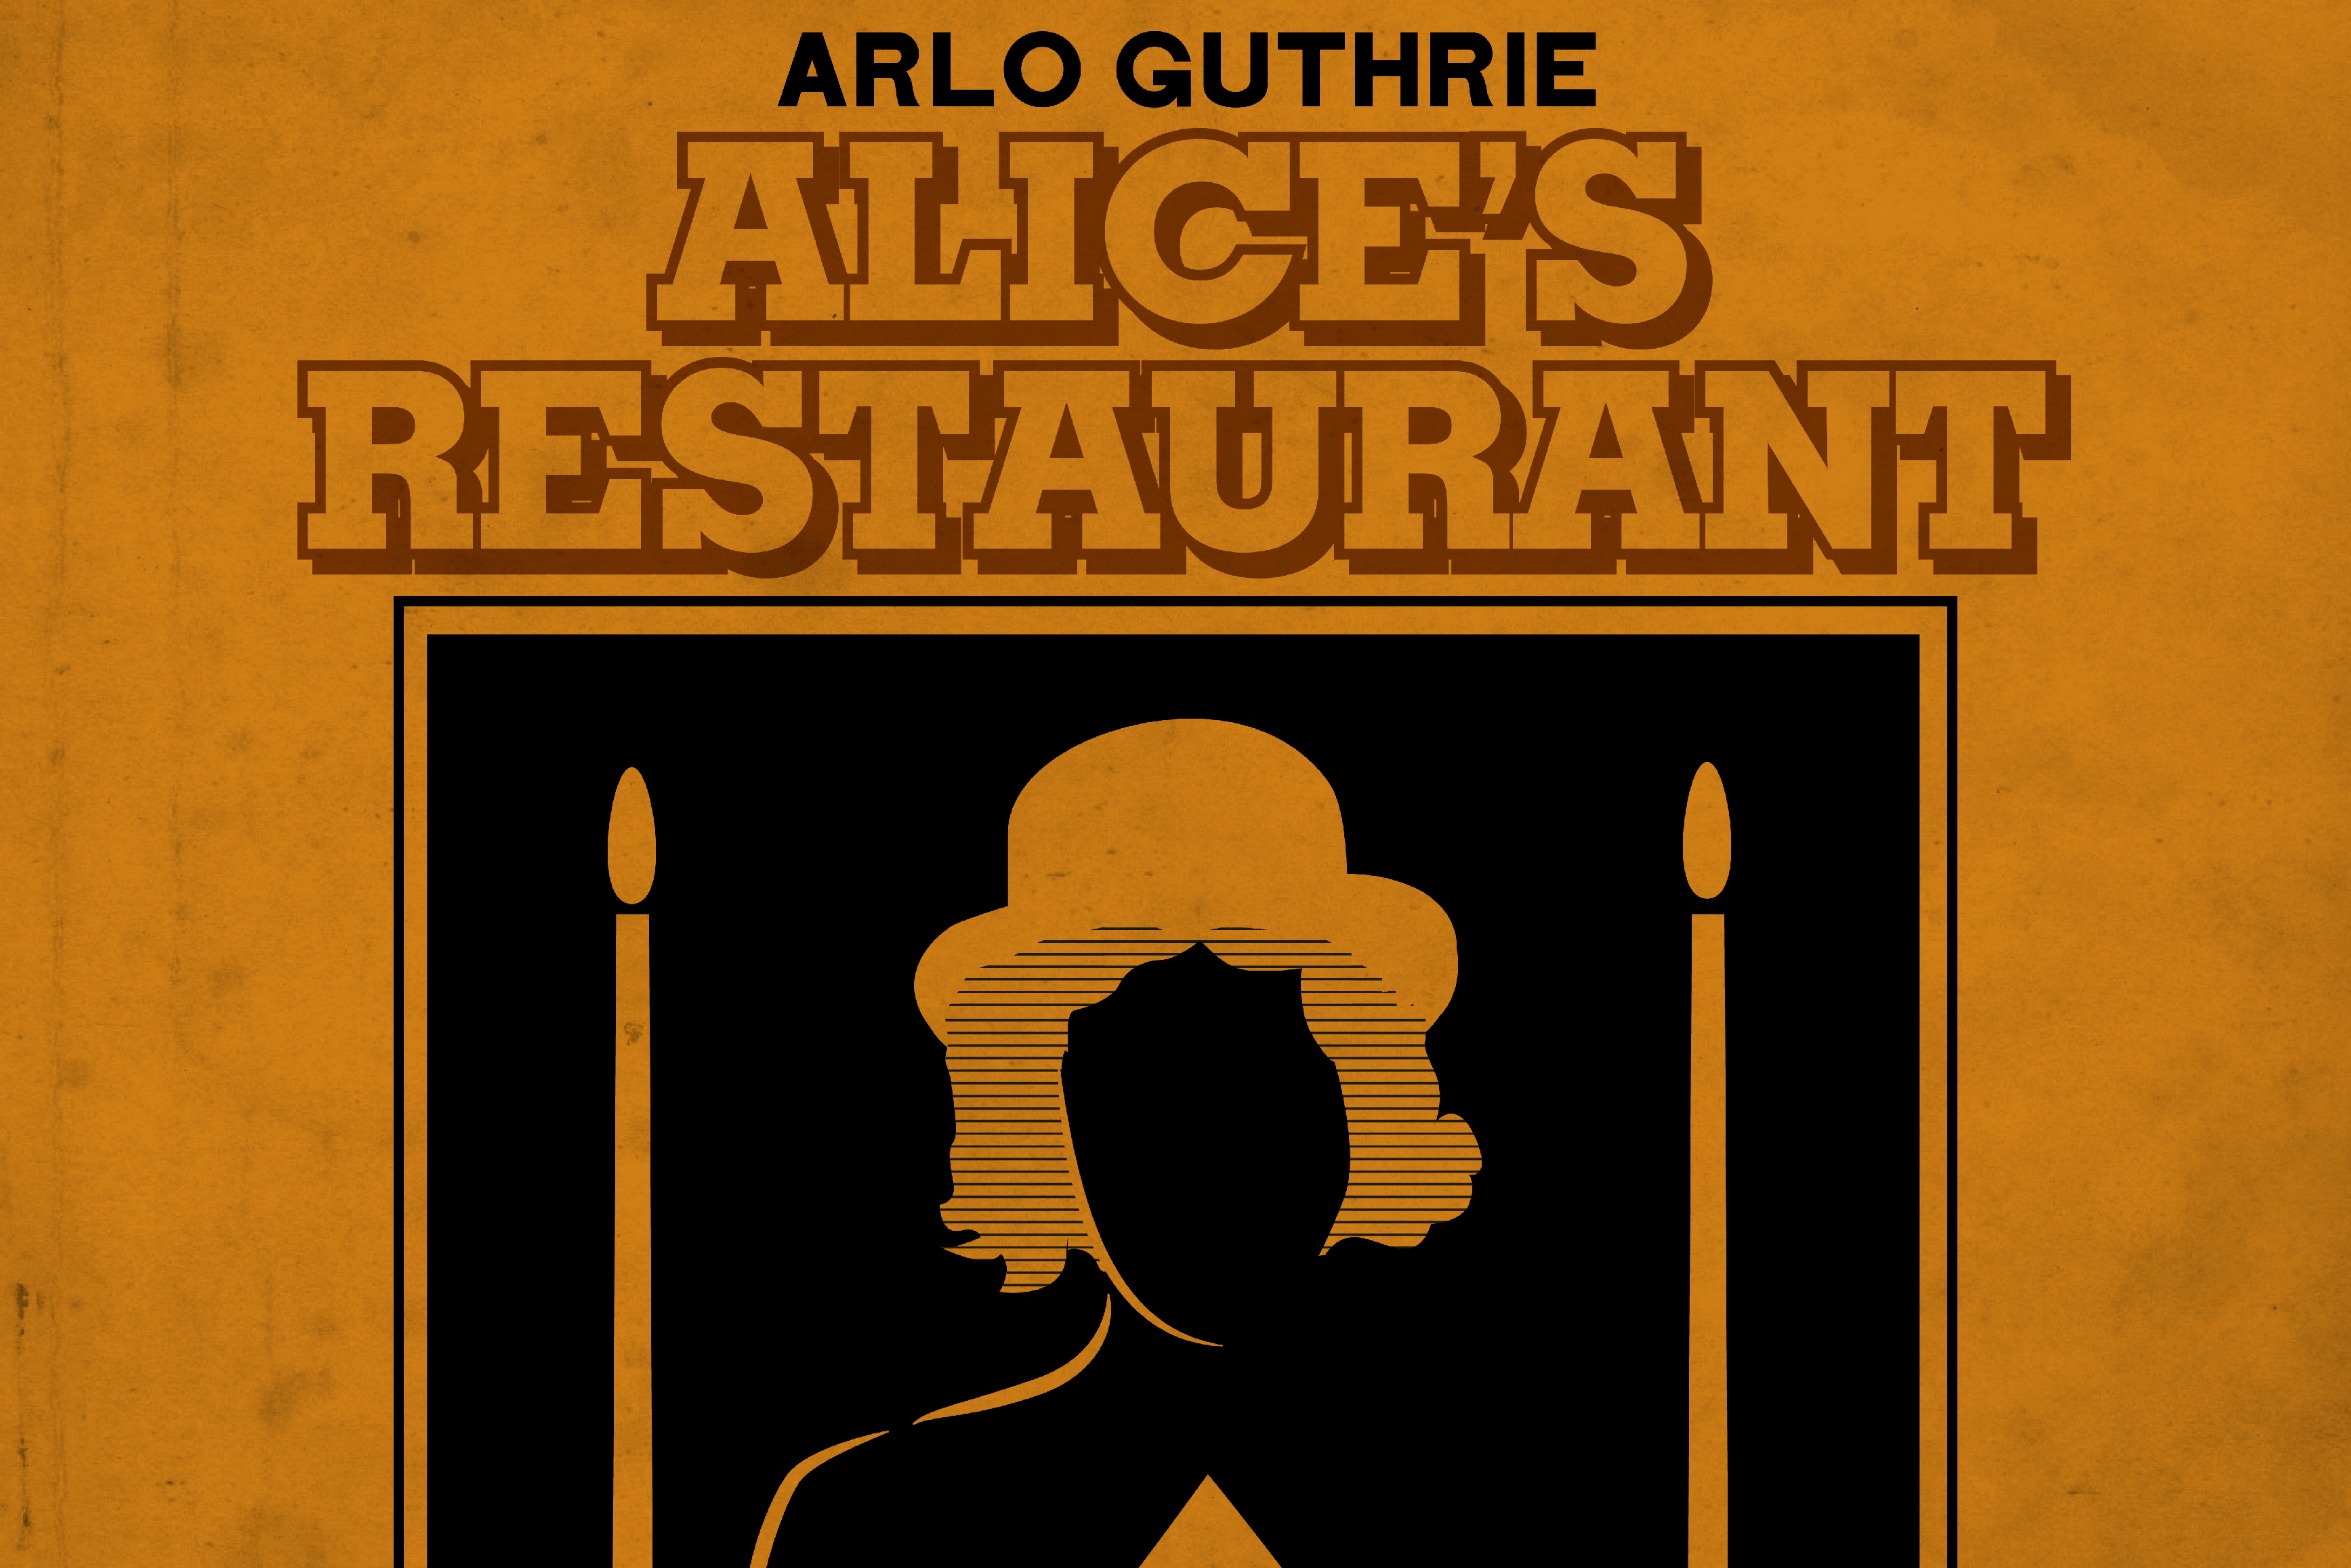 Arlo Guthrie and More Musings from Me